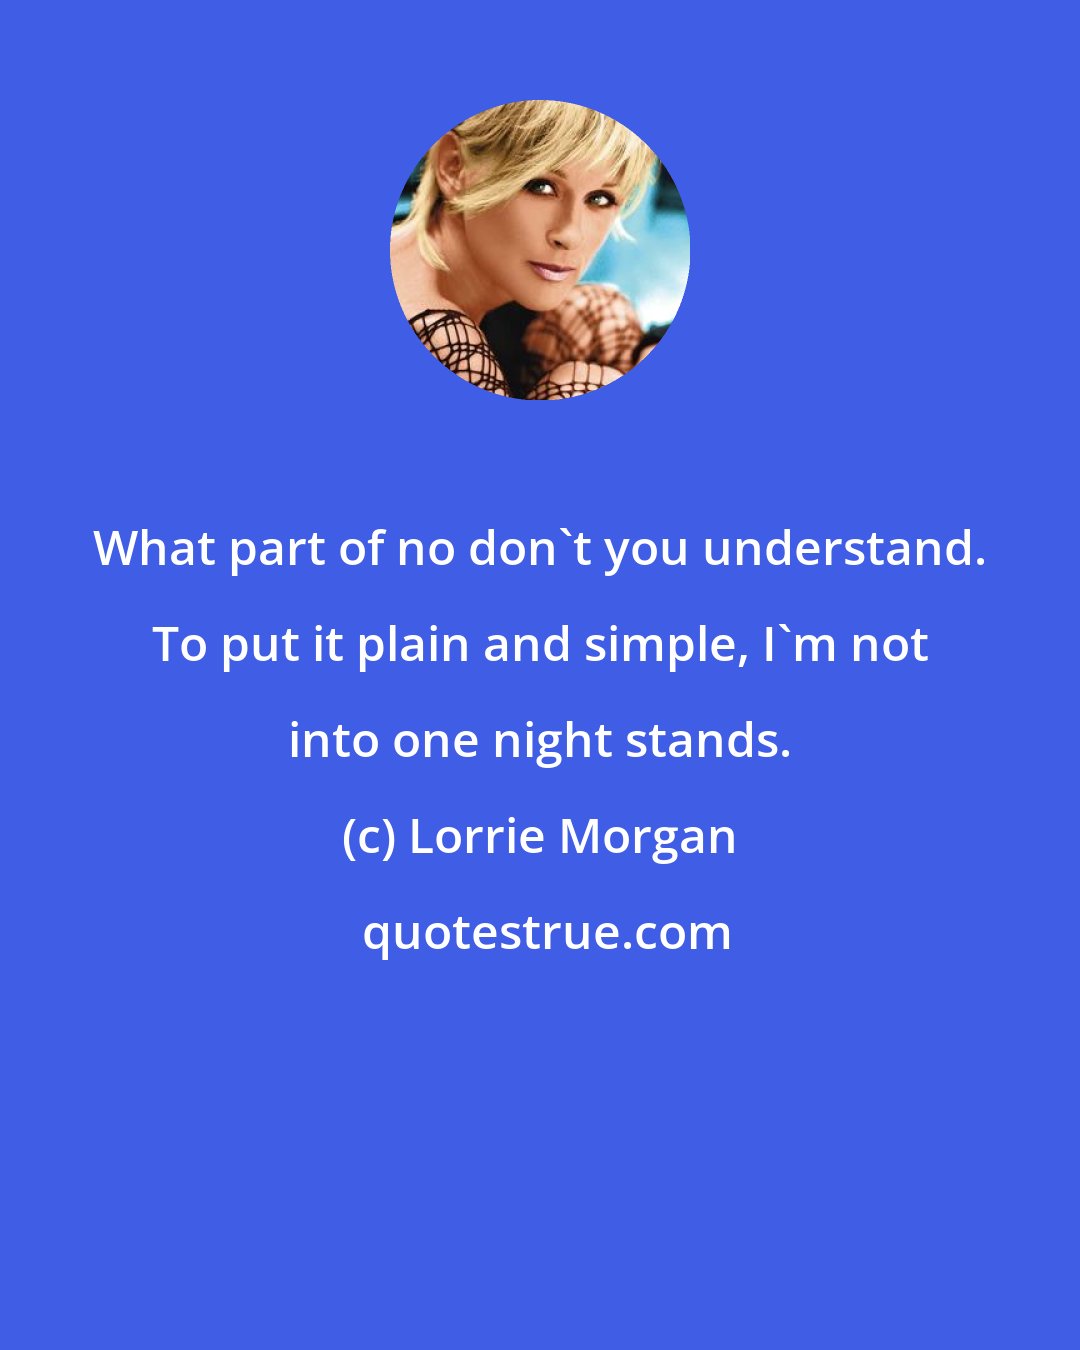 Lorrie Morgan: What part of no don't you understand. To put it plain and simple, I'm not into one night stands.